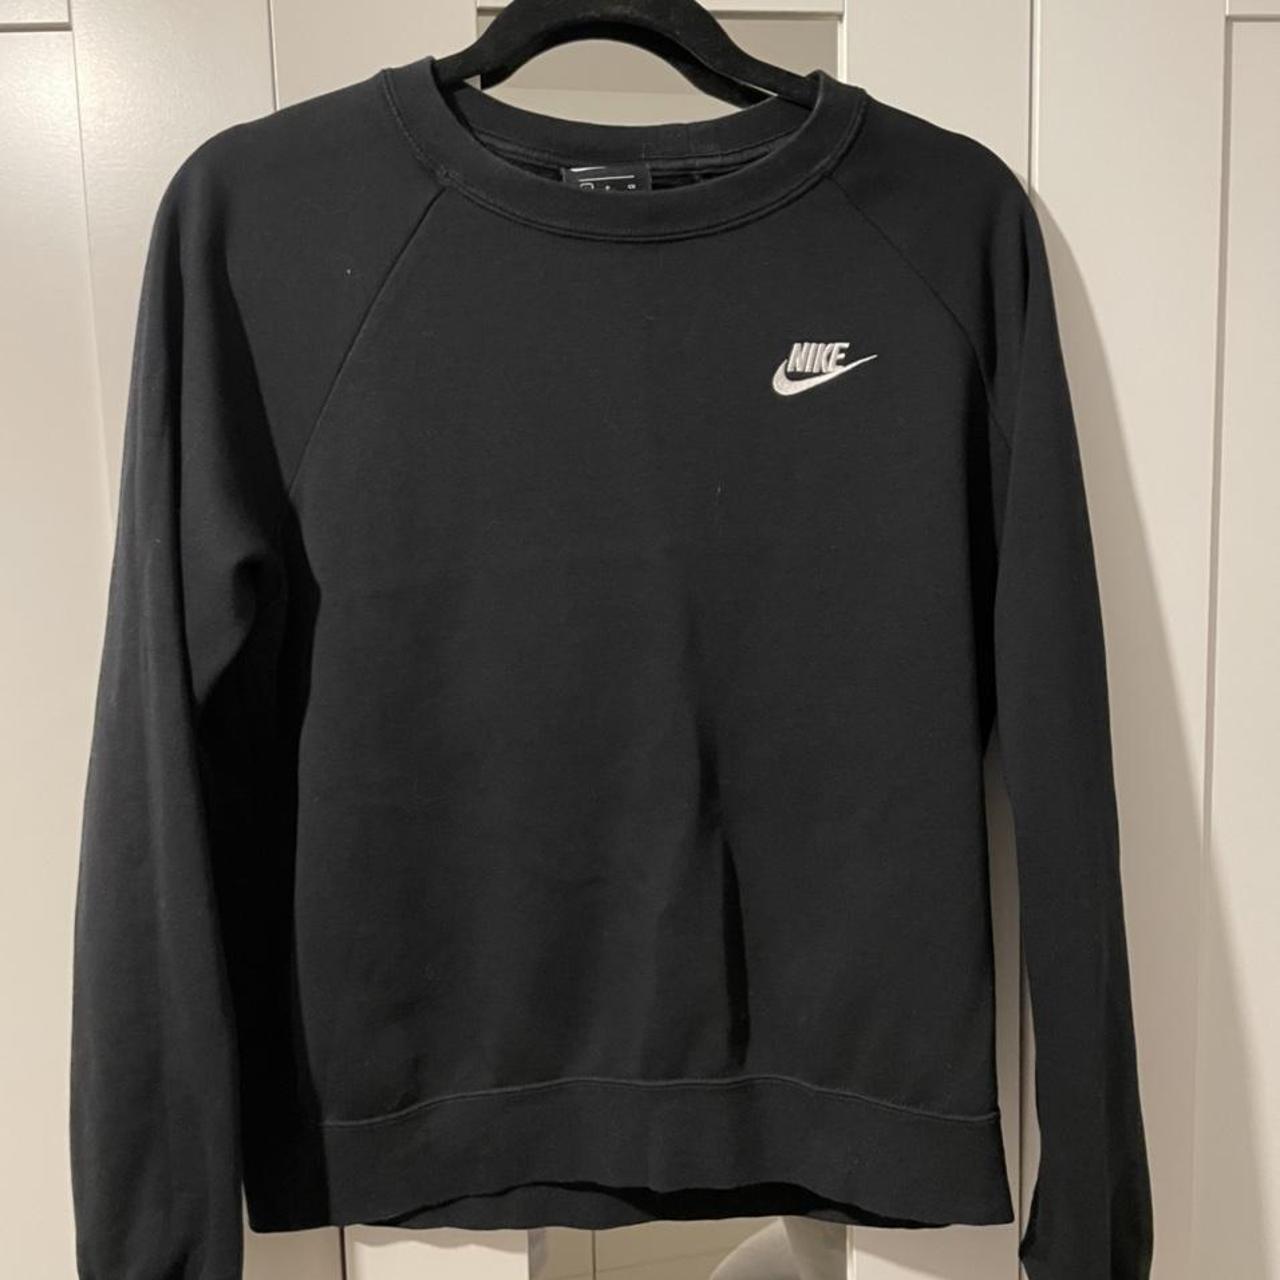 Nike crew neck jumper size small. Excellent condition. - Depop